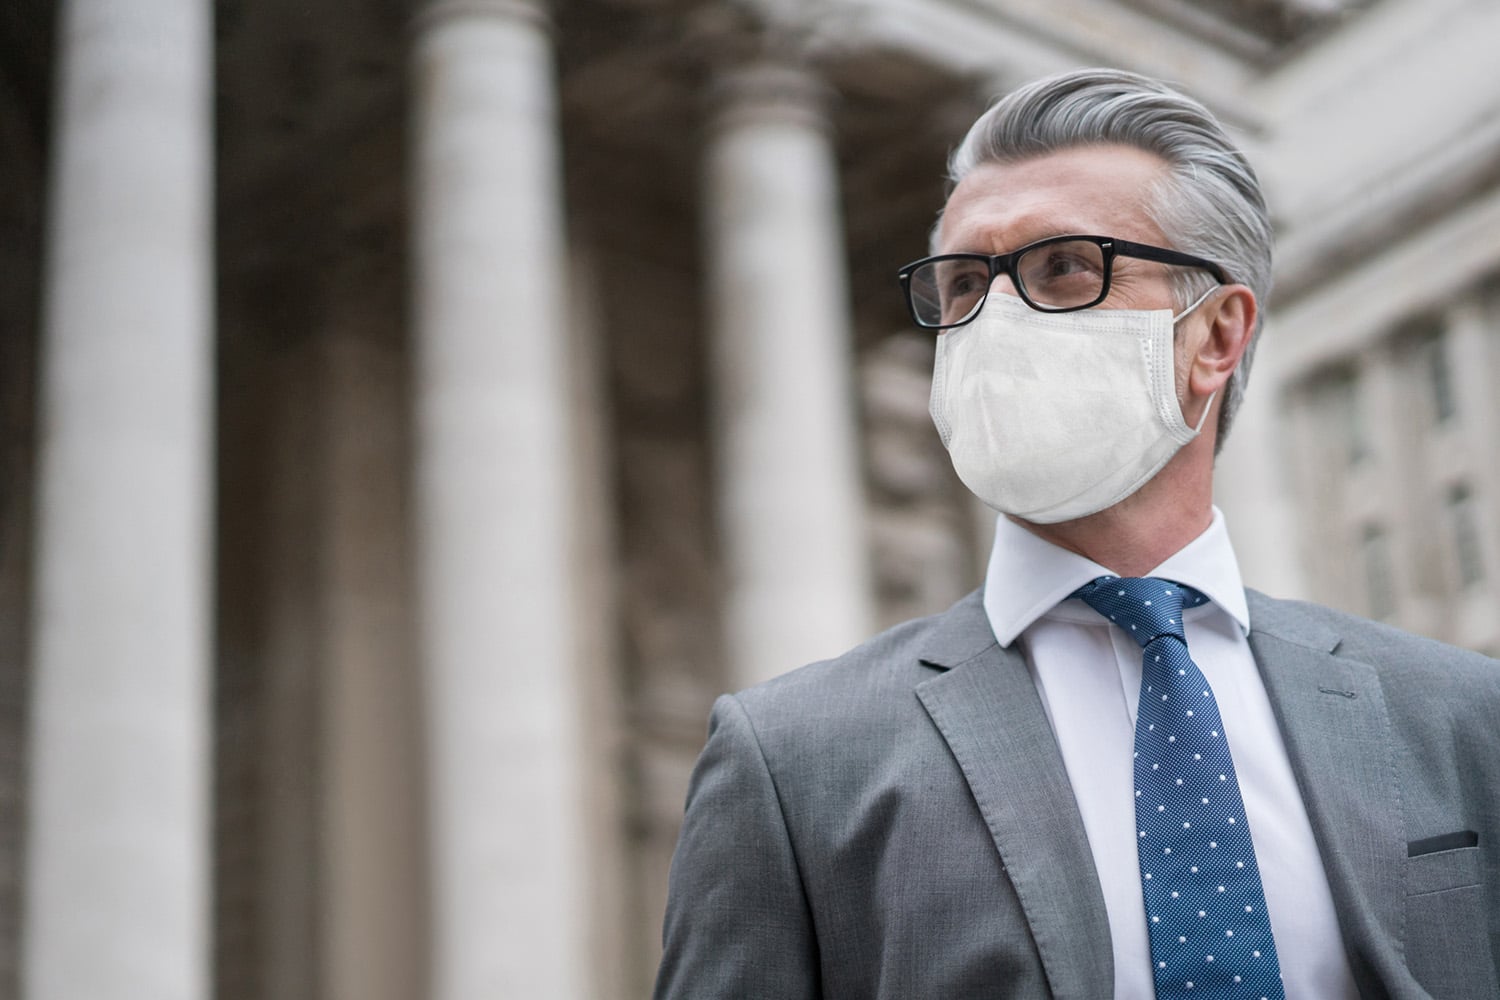 Portrait of a successful business man on the street wearing a facemask to avoid COVID-19 â Pandemic concepts